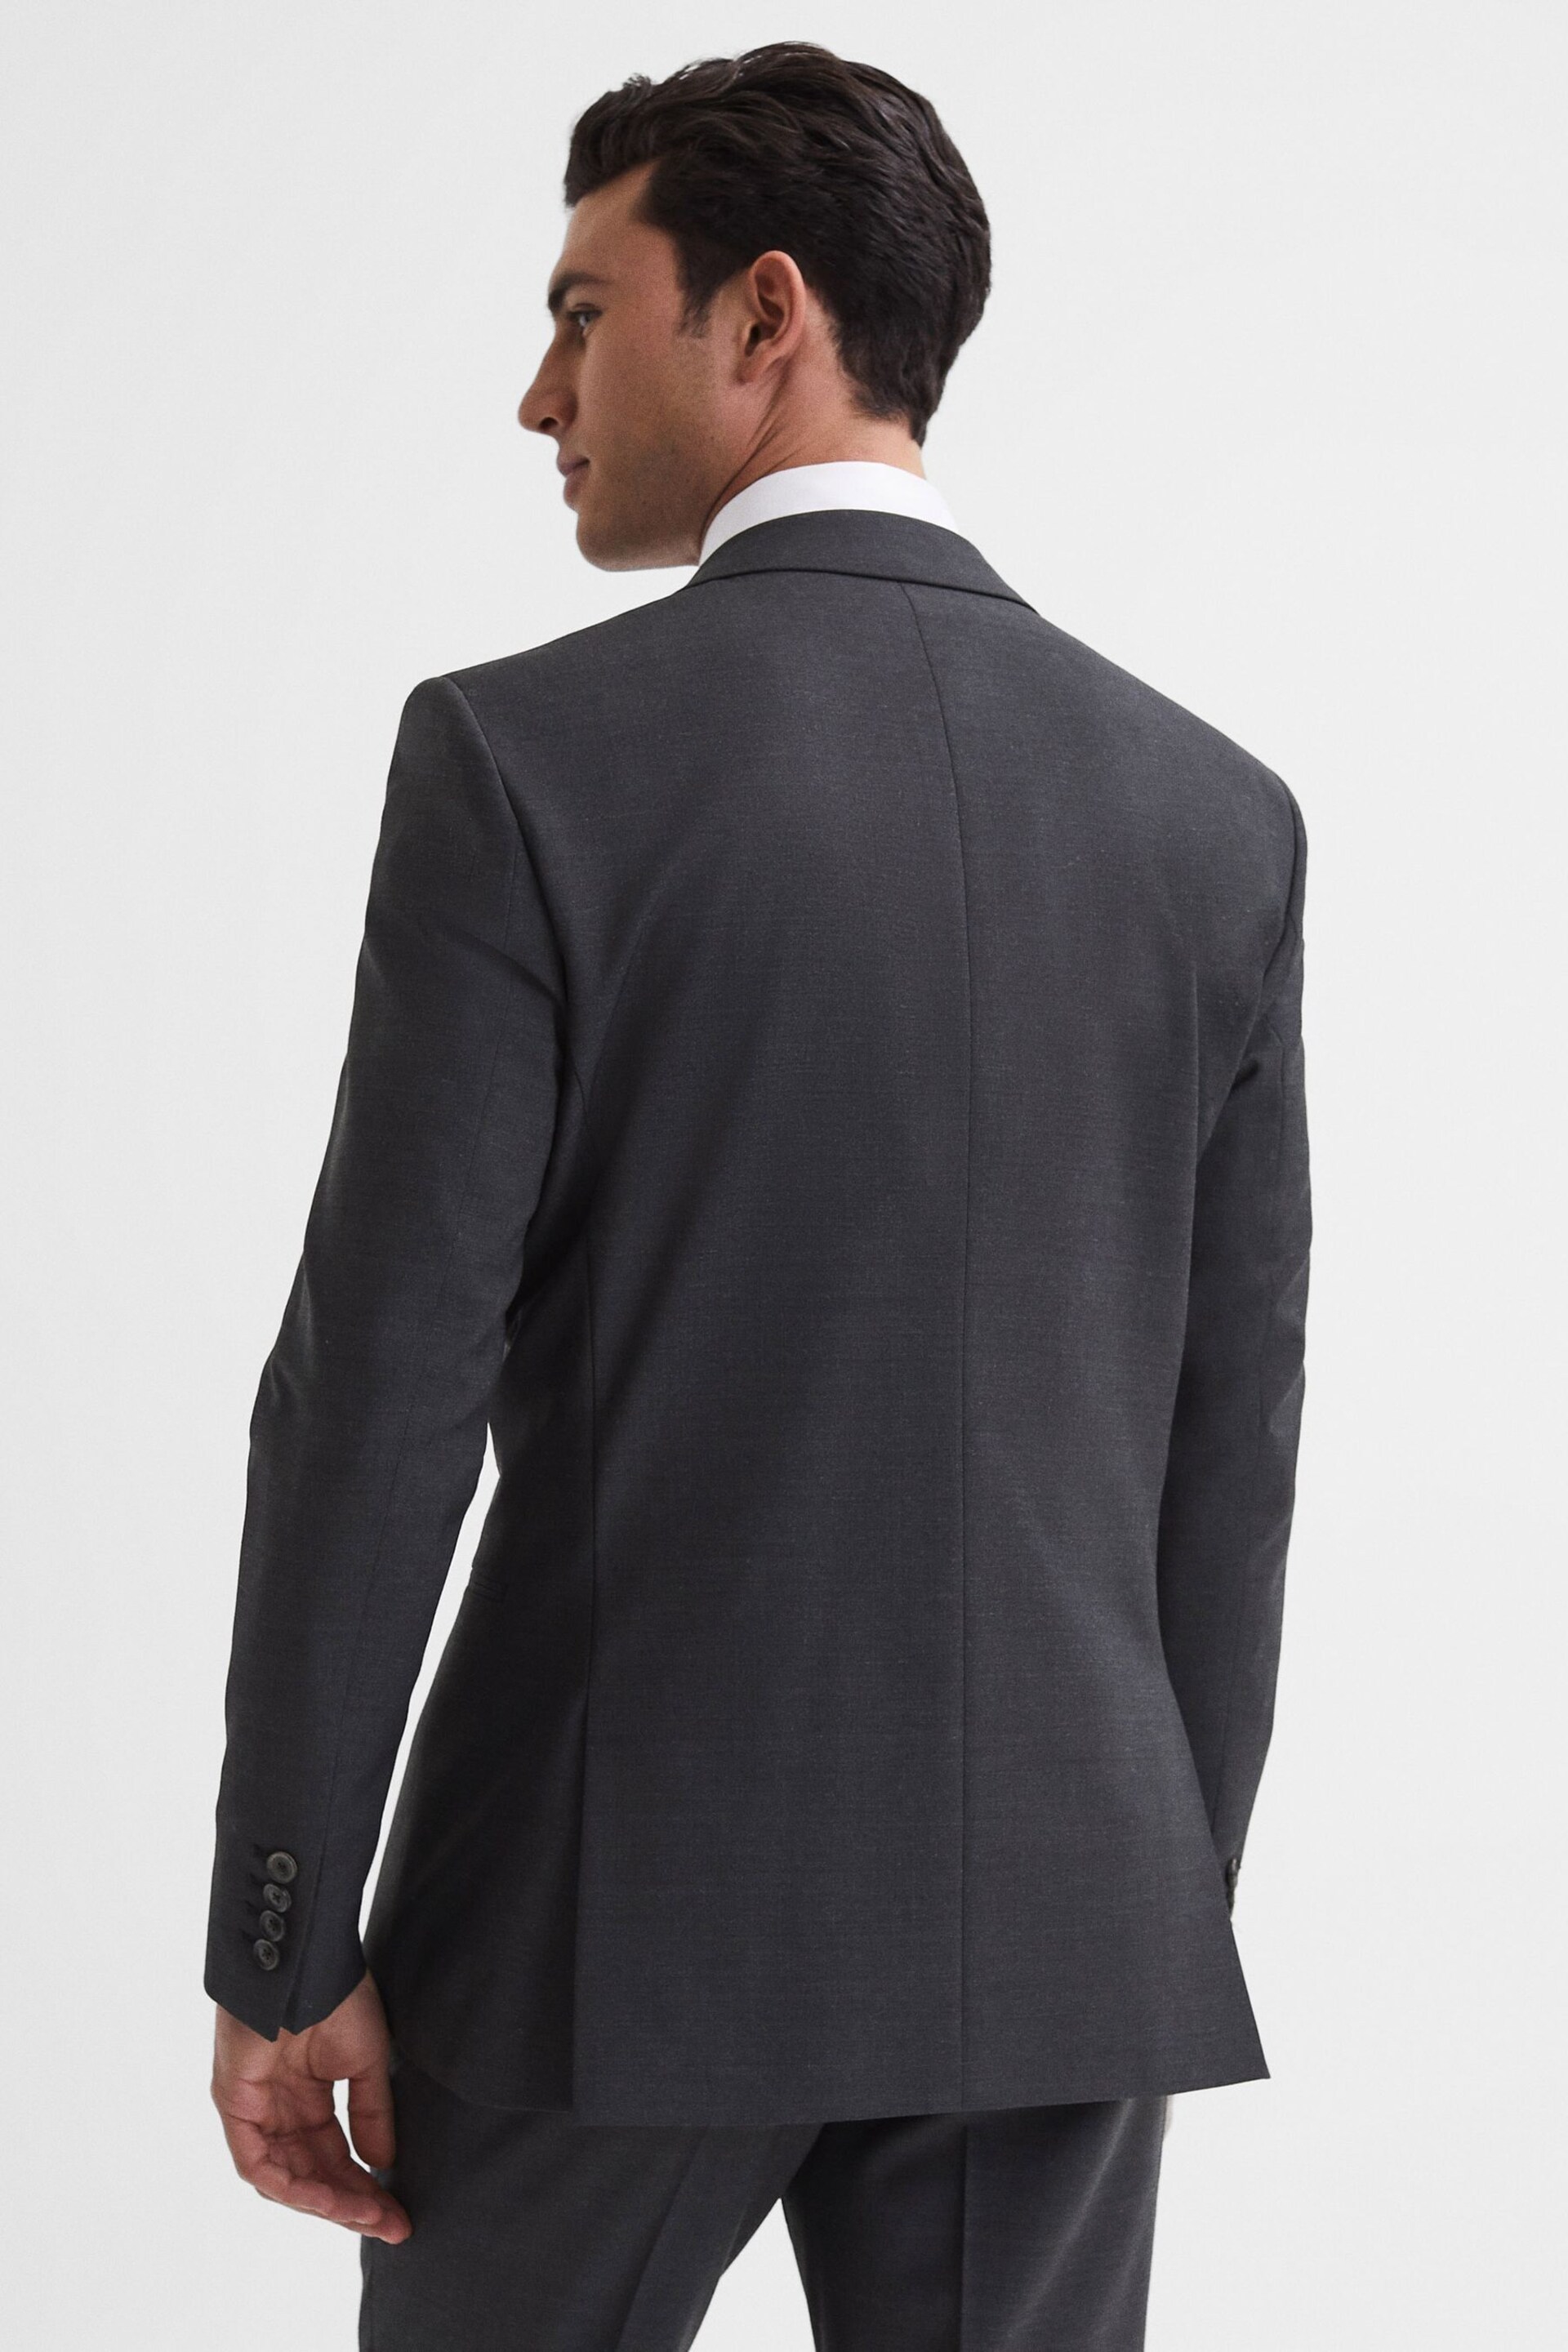 Reiss Charcoal Hope Modern Fit Travel Blazer - Image 5 of 8